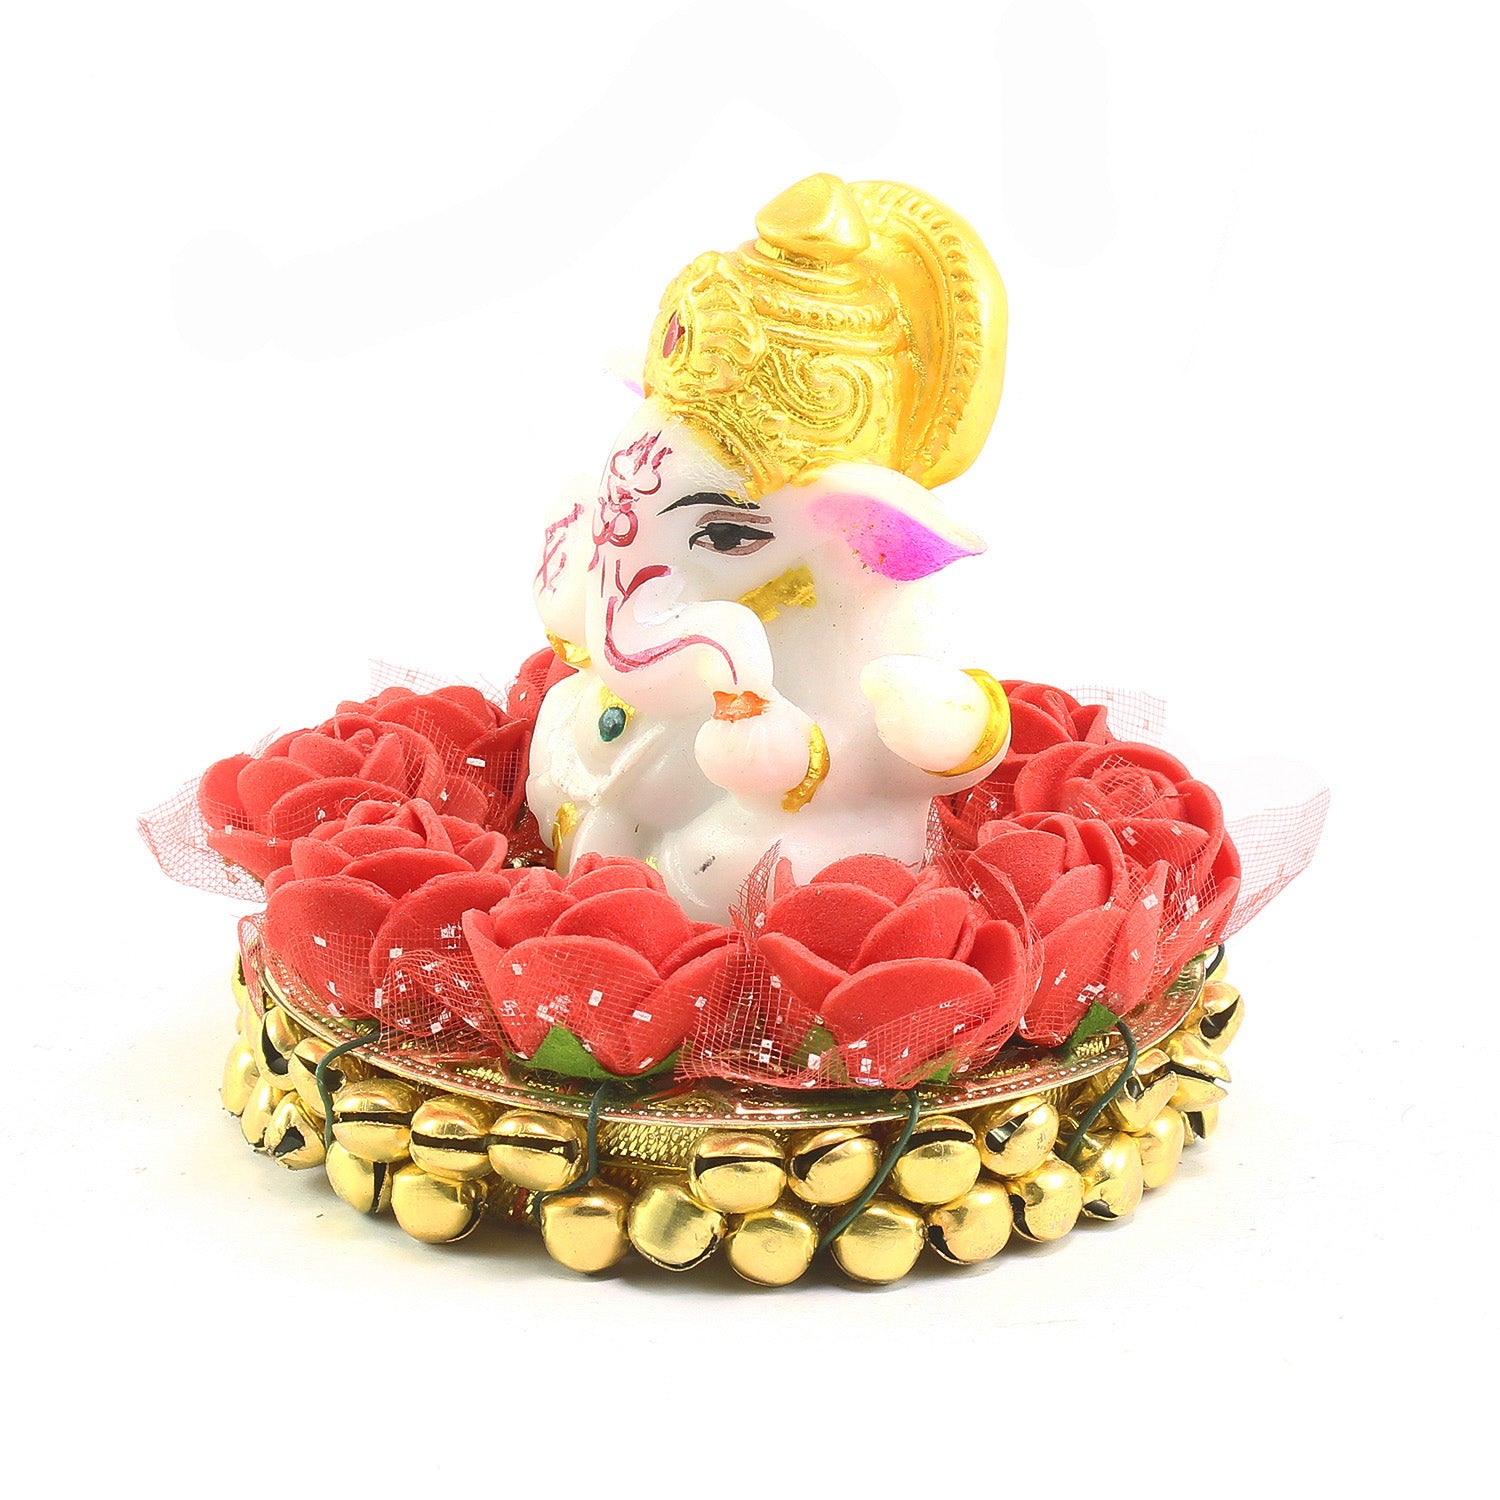 Polyresin Lord Ganesha Idol on Decorative Plate for Car Dashboard and Home 4